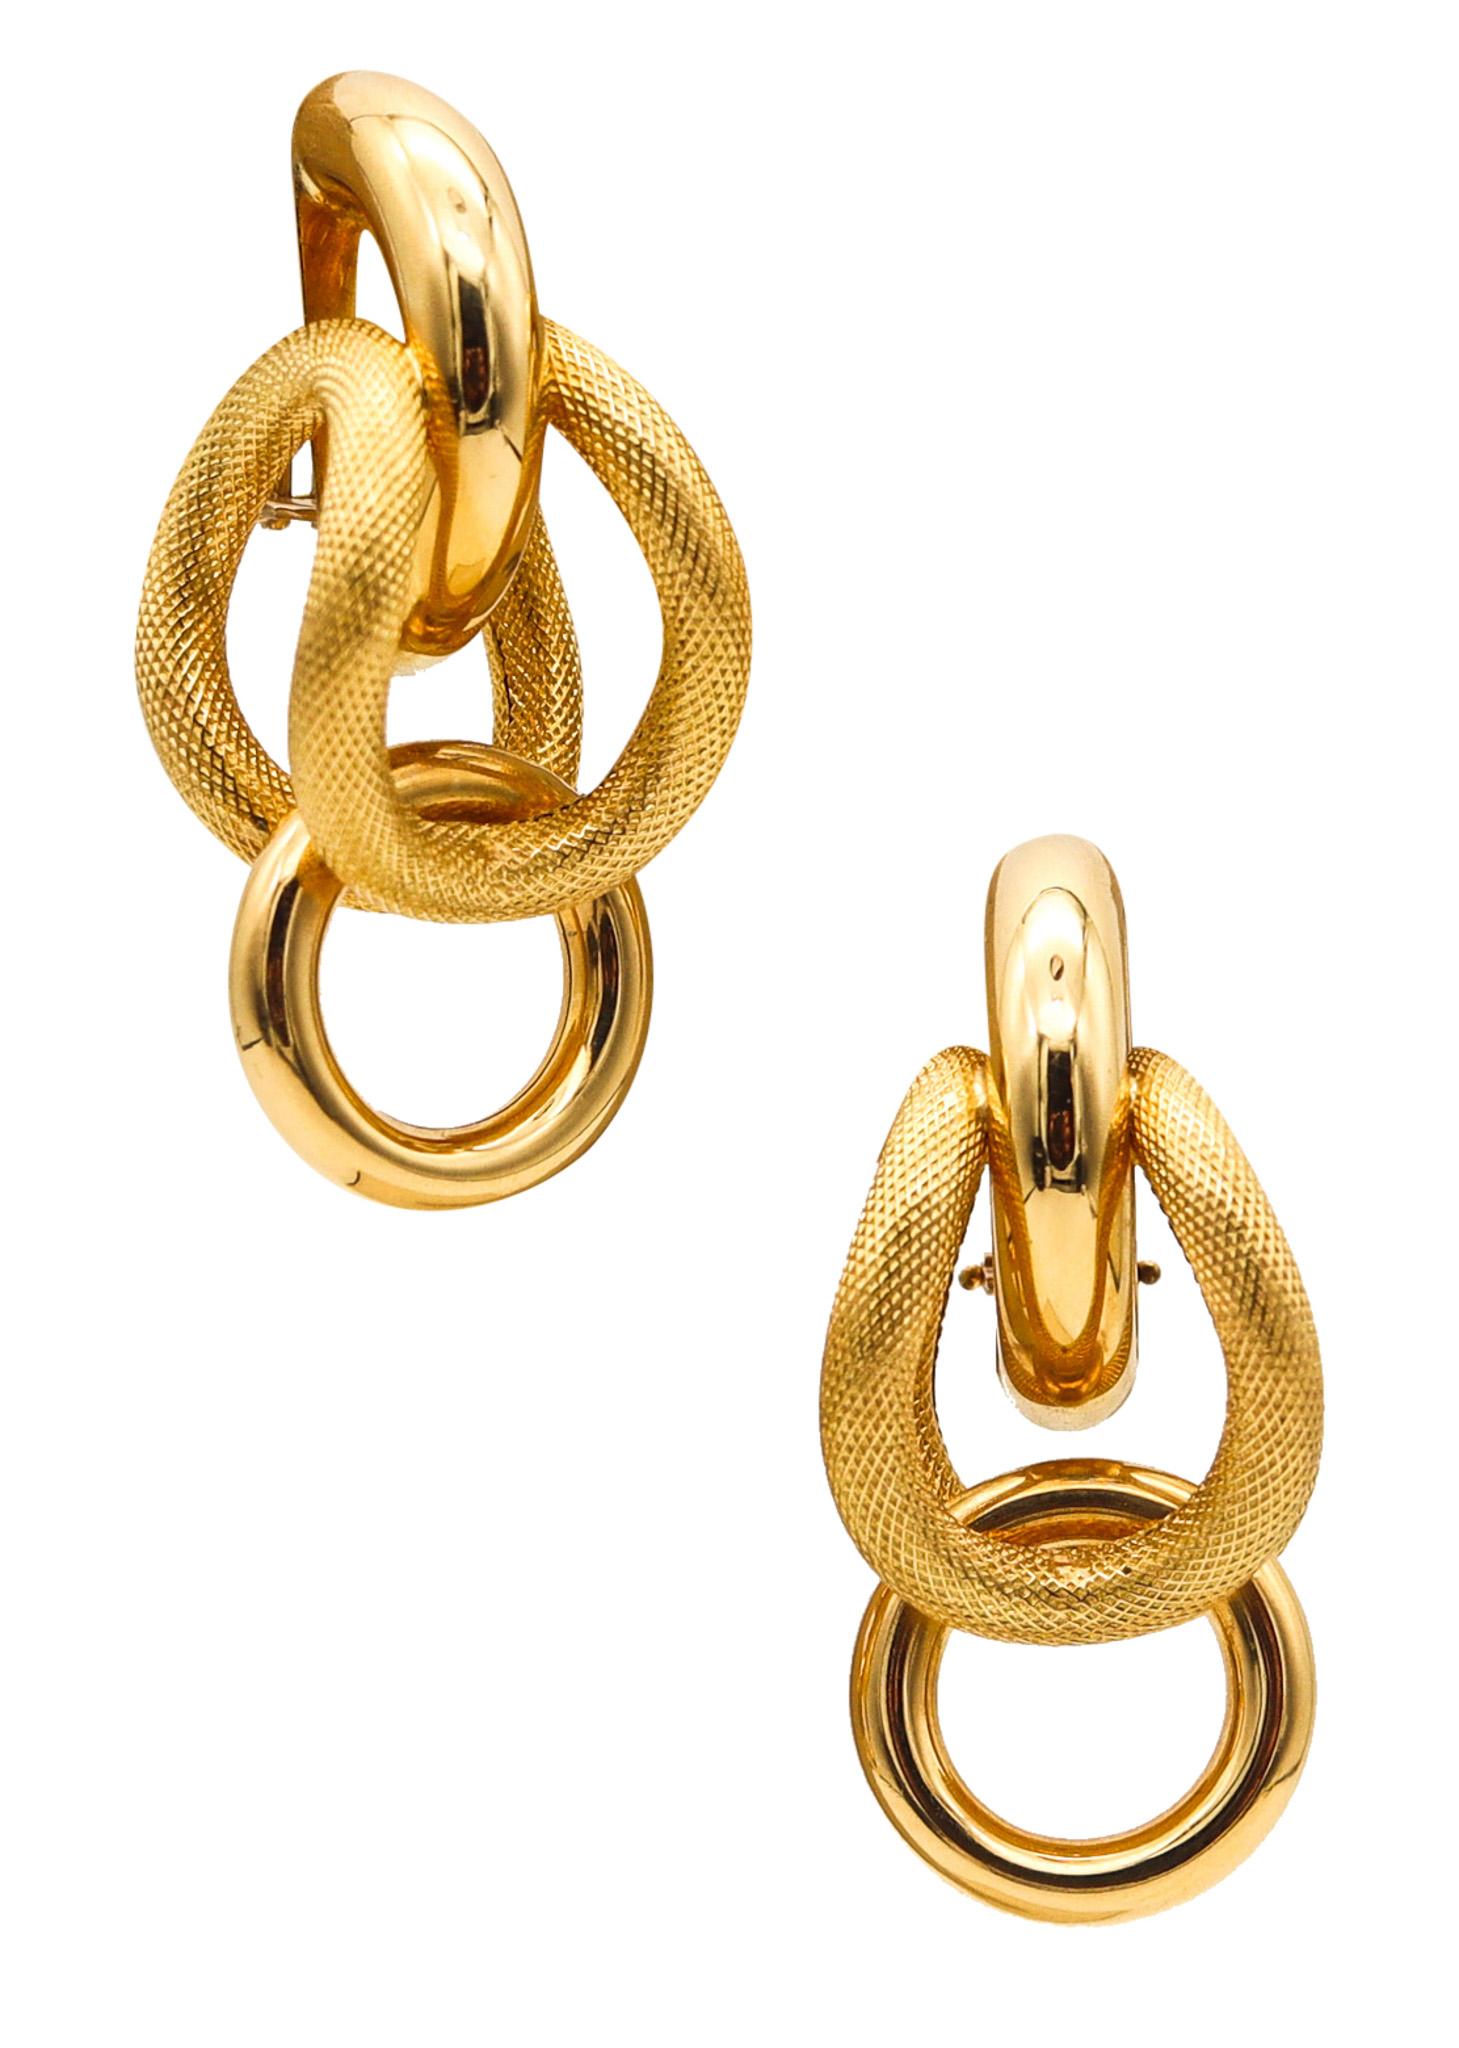 Riccardo Marotto Sculptural Tubular Earrings In Textured 18Kt Yellow Gold For Sale